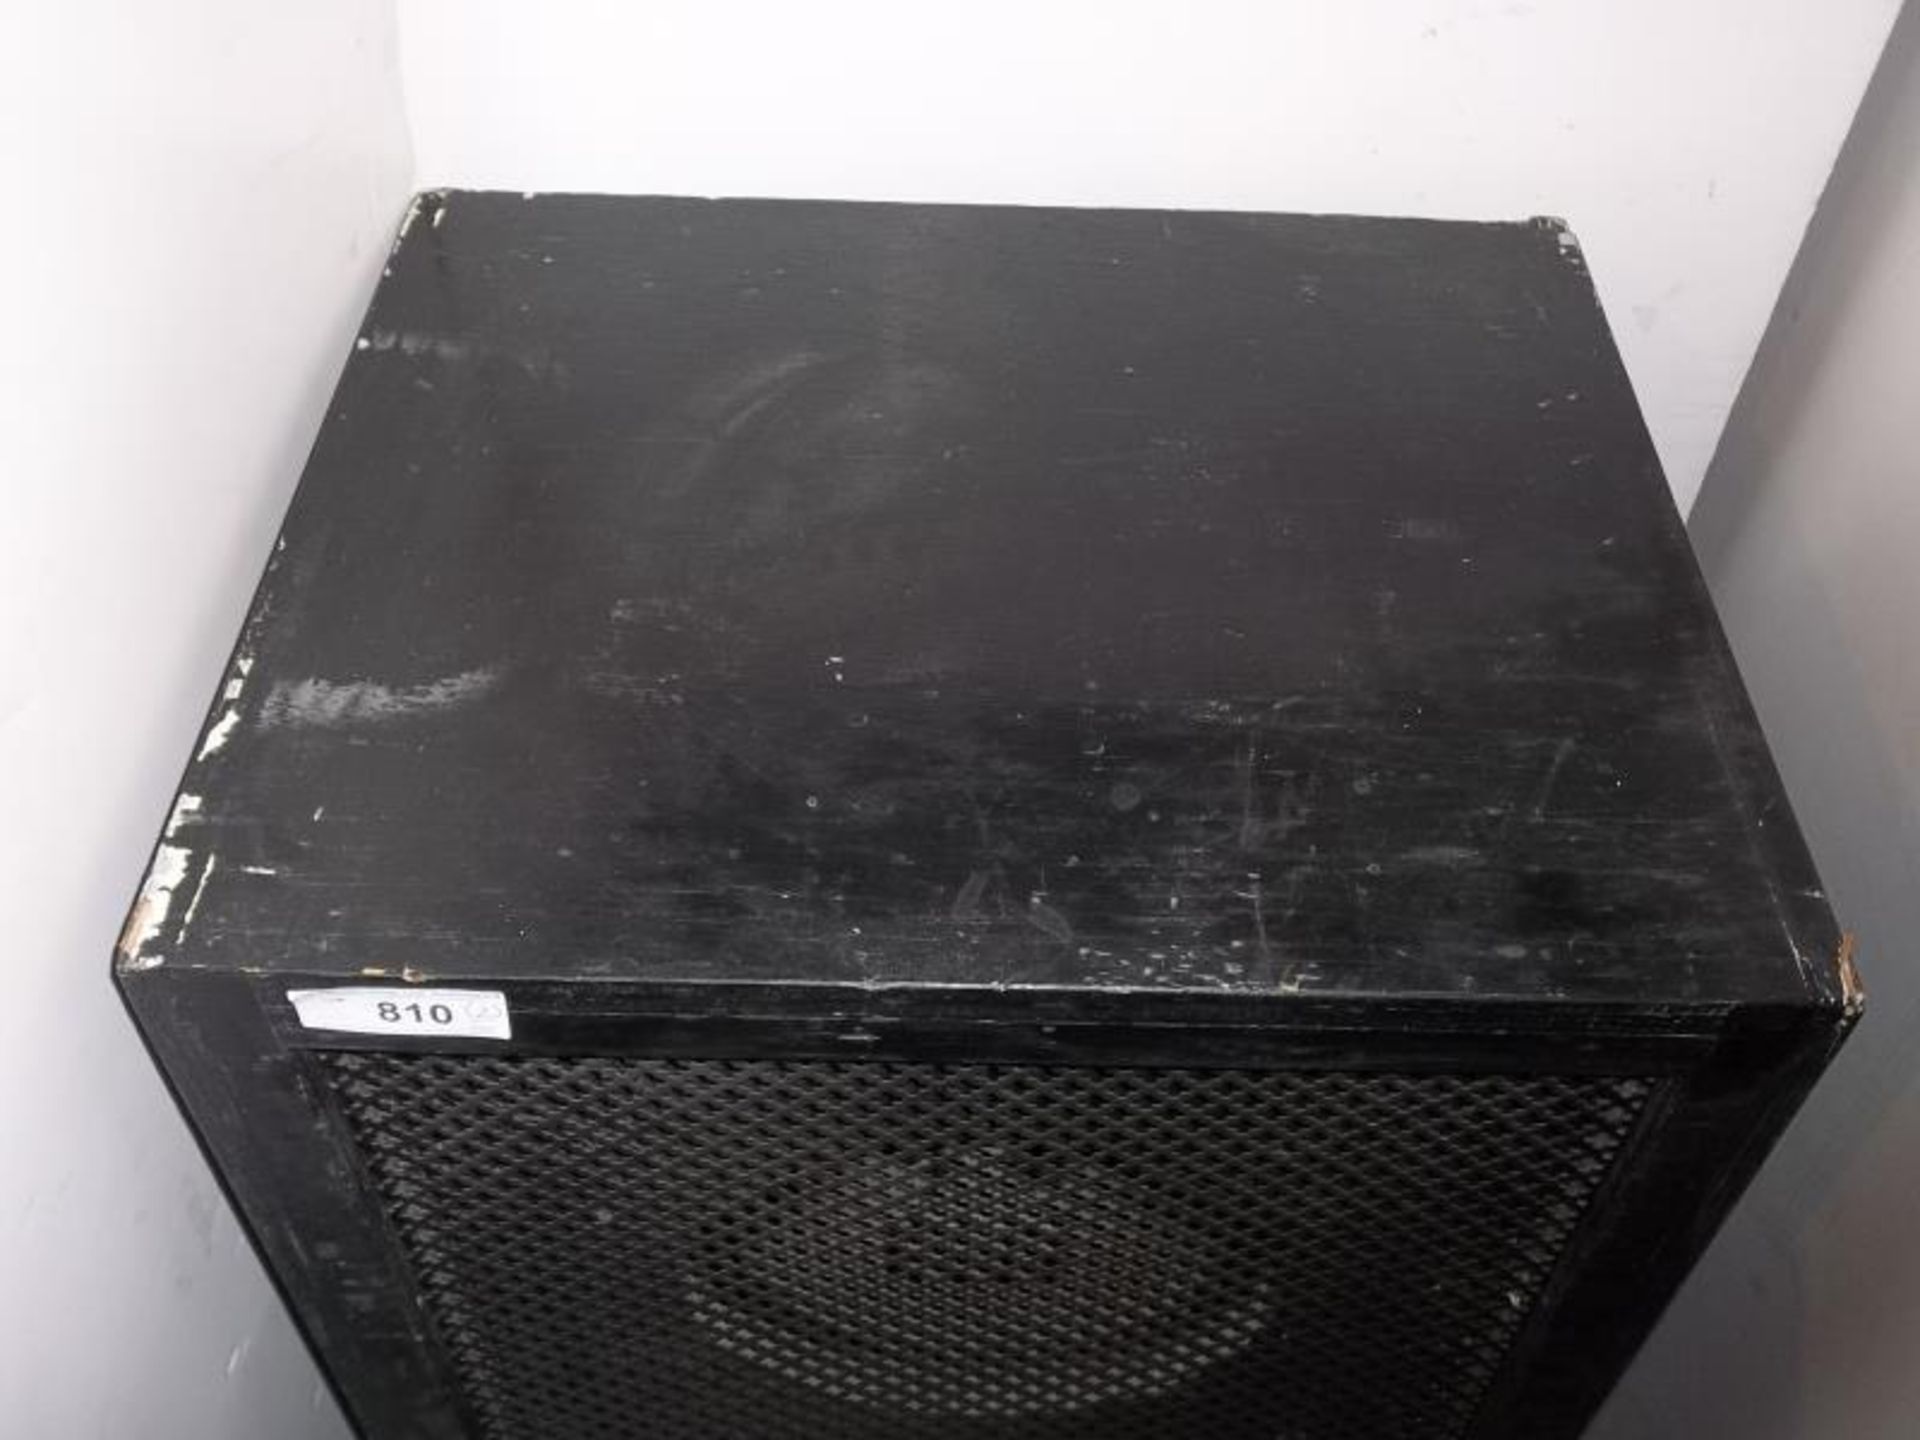 Pair of Altec speaker cabinets, painted black with one speaker in each, some damage to screens and - Image 2 of 12